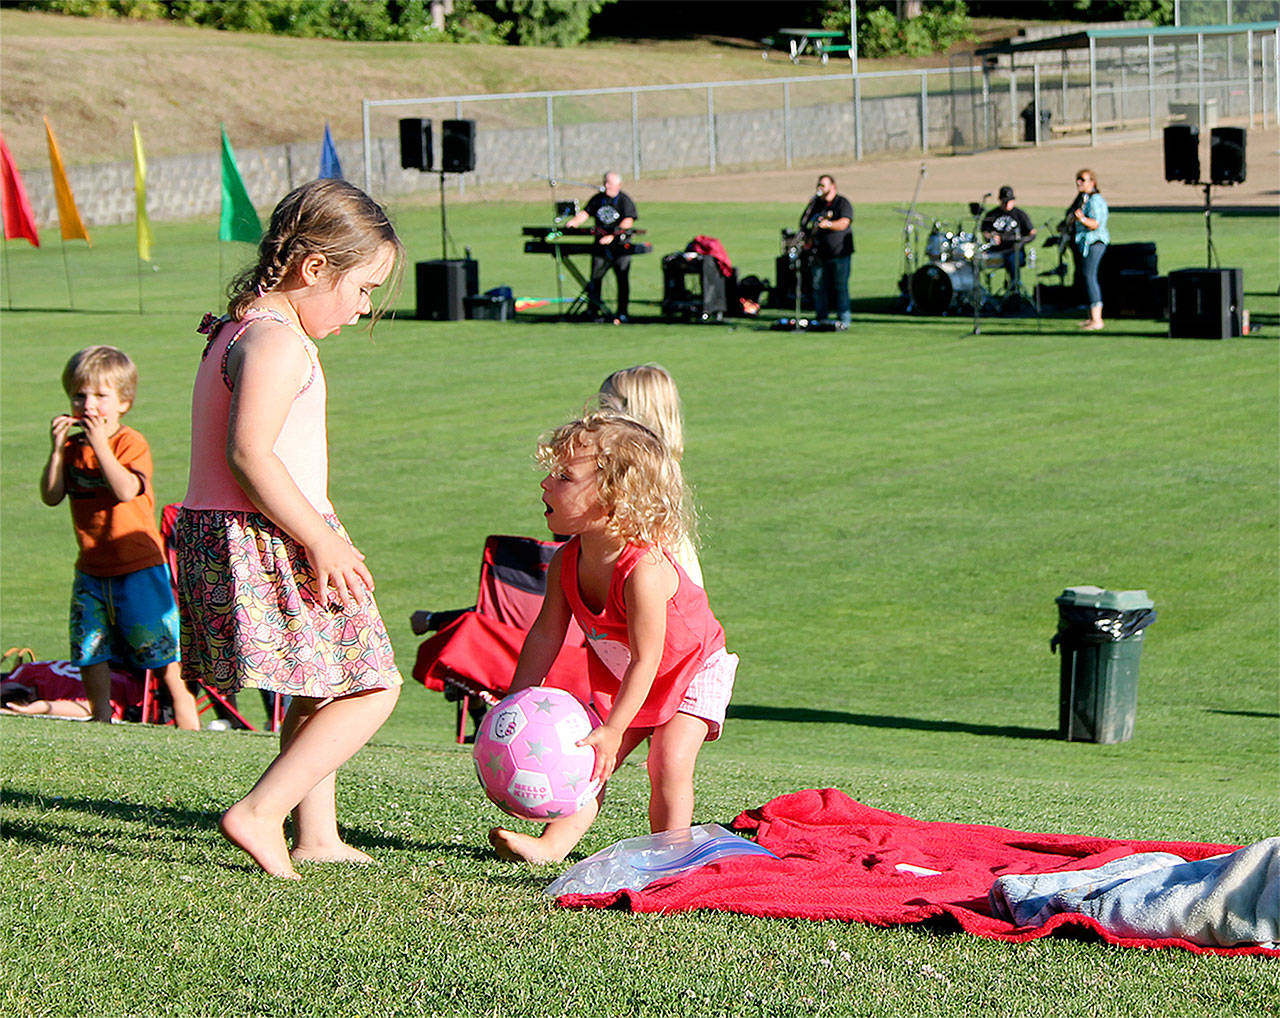 Record file — Kids play while their family have a picnic during last year’s Concerts in the Park series.